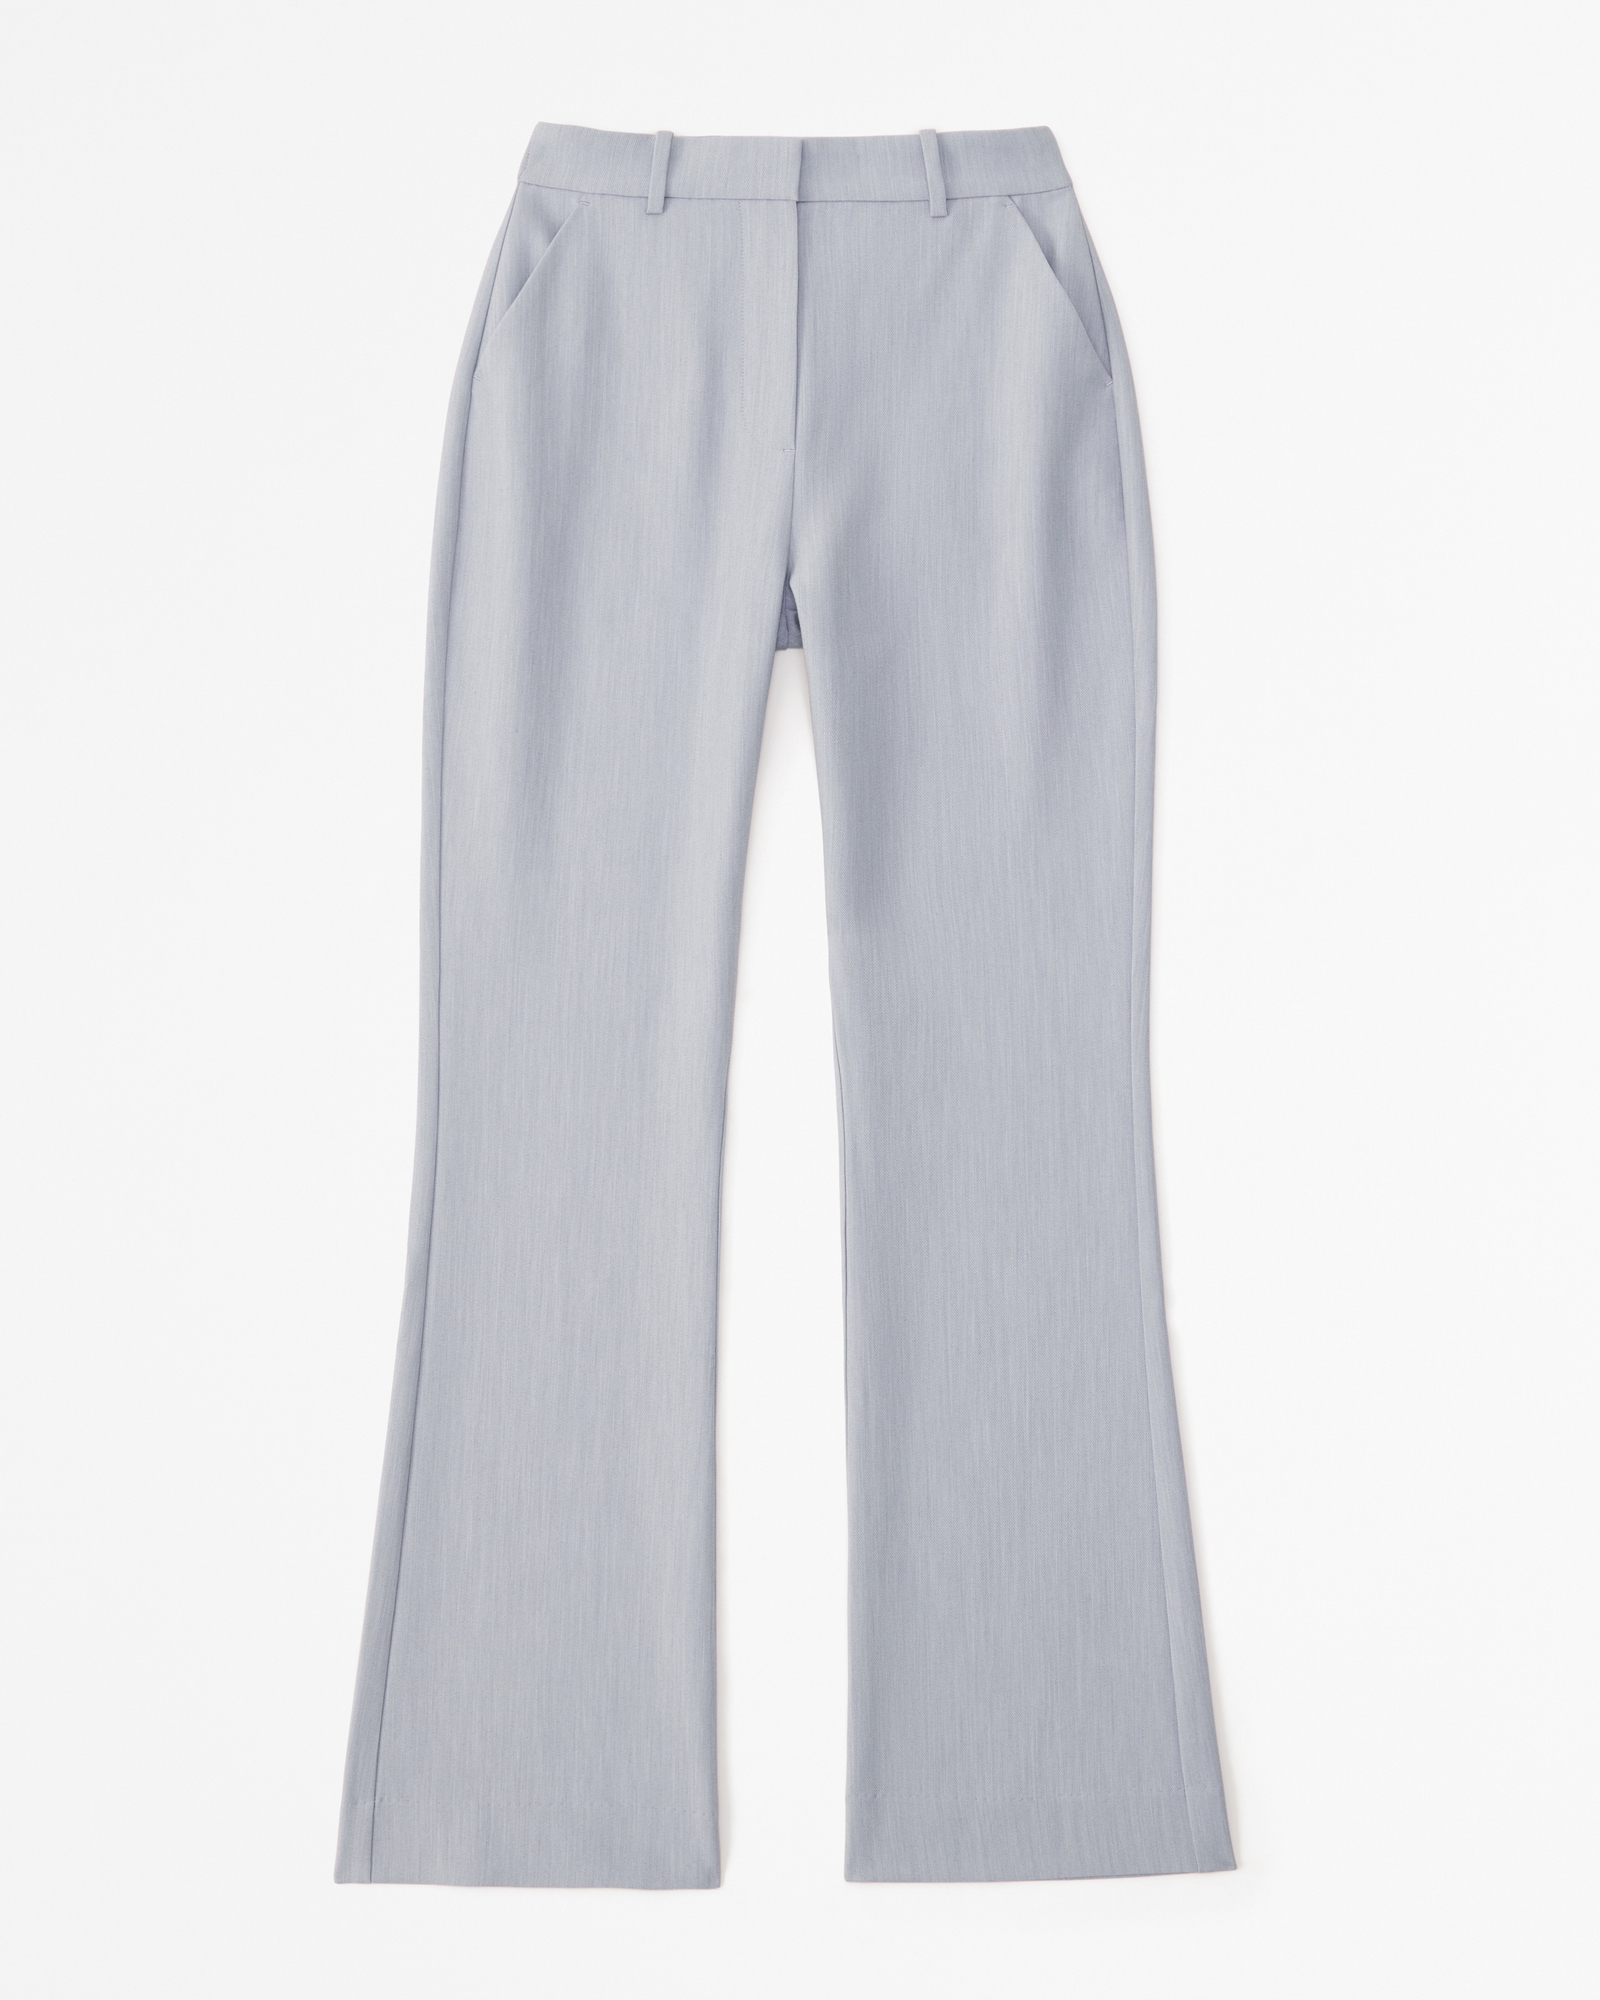 Women's Comfy Flare Pants - Mincer's of Charlottesville